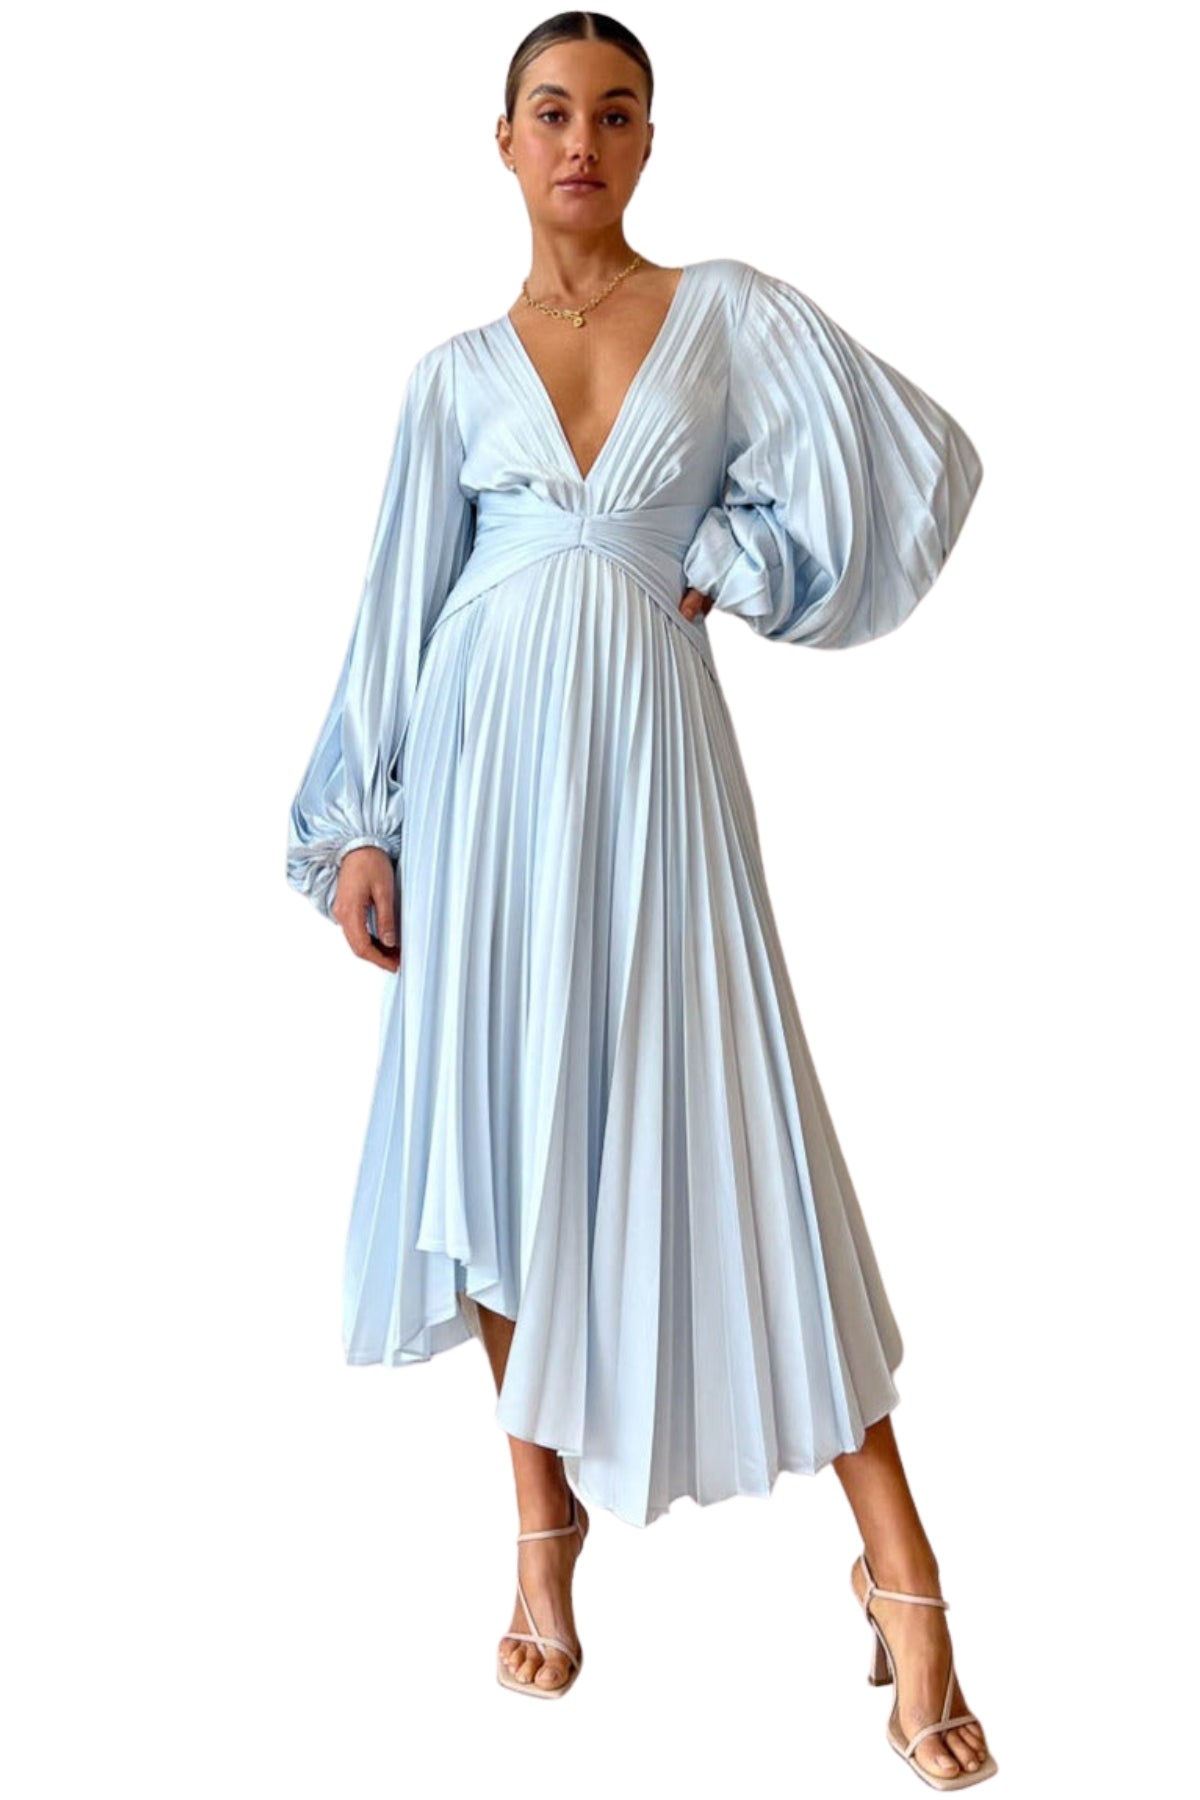 Acler ACLER Palms Dress (Sky Blue) - RRP $495 - USETHISFORWEBSITEPRODUCT-2023-01-16T113050.646.jpg